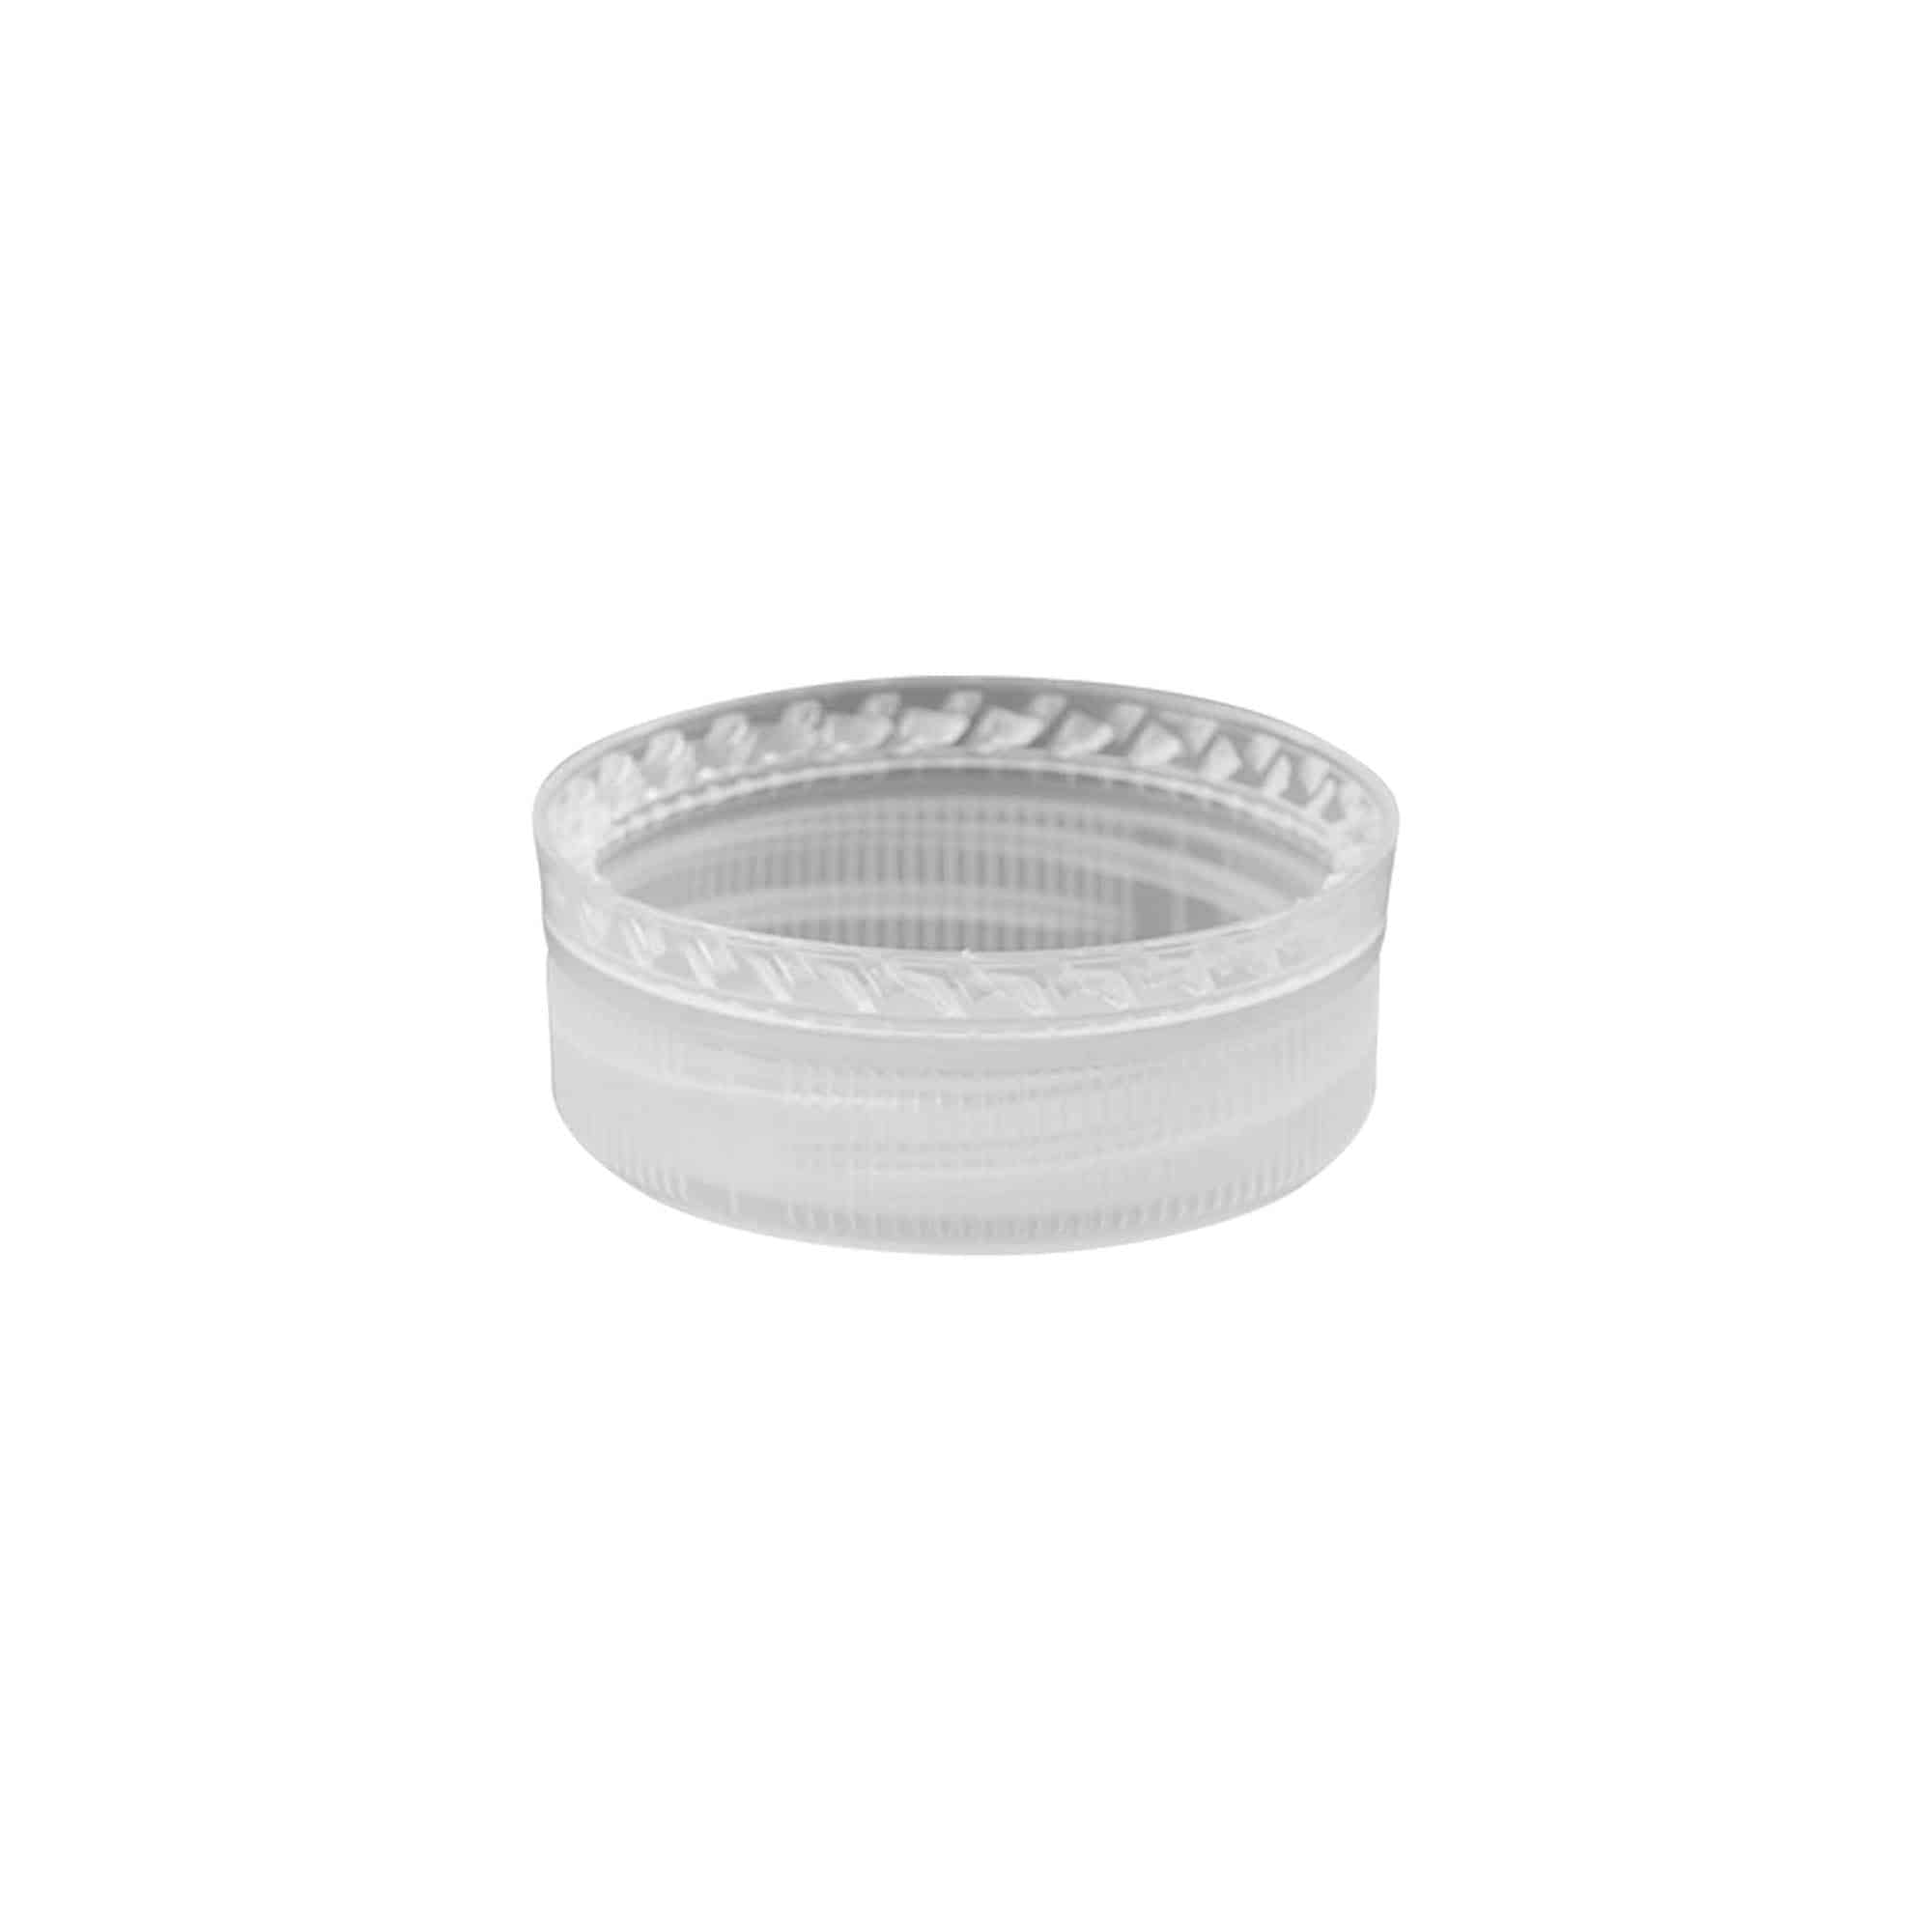 Screw cap for two start thread, PE plastic, white, for opening: PET 38 mm